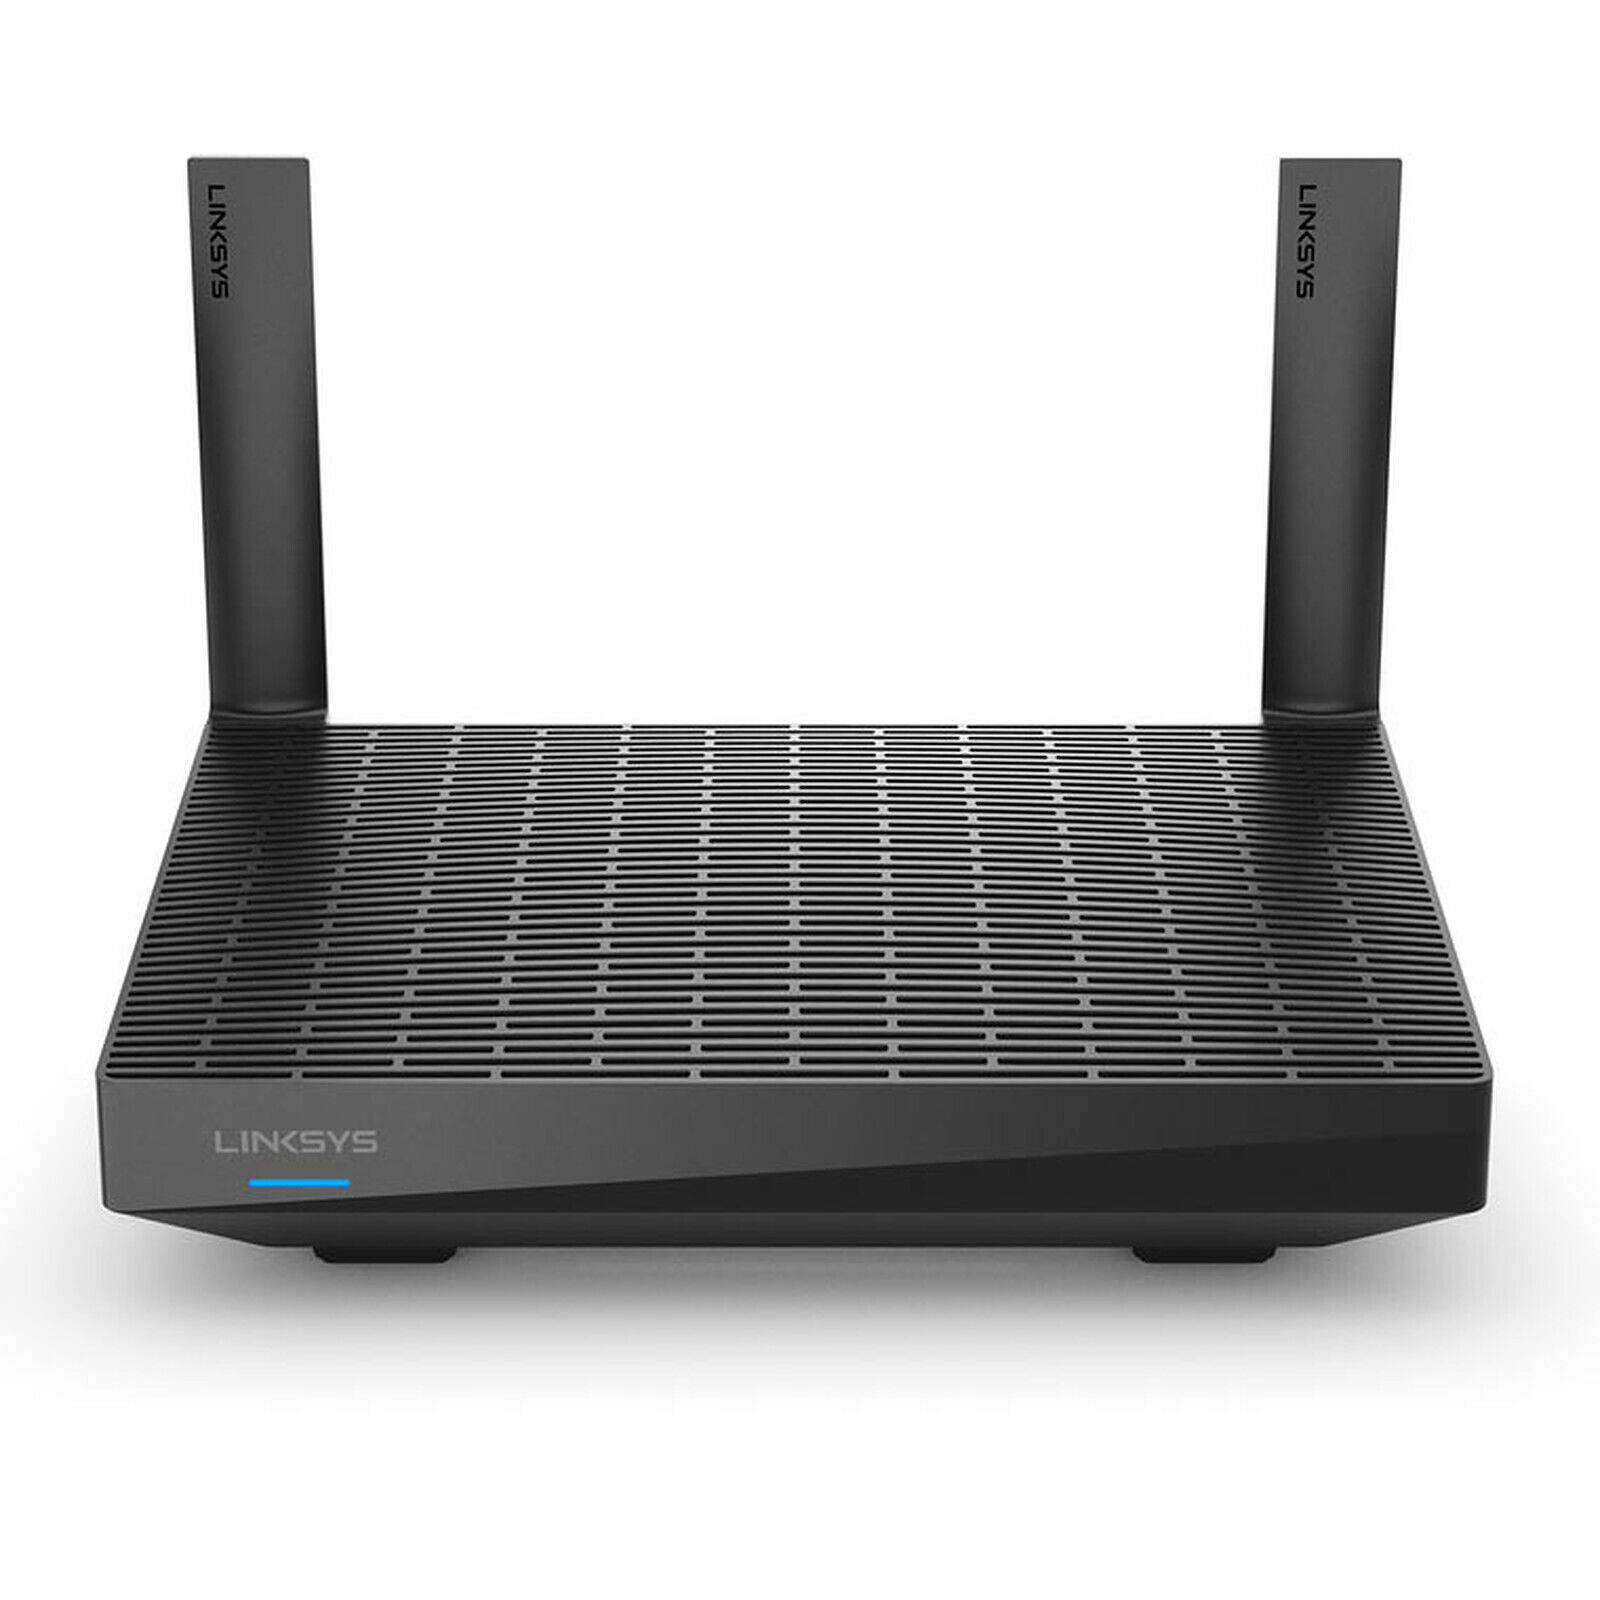 Linksys Max-stream Mesh Wifi 6 Router MR7350 (AX1800) 1,700 Sq. Ft. Coverage